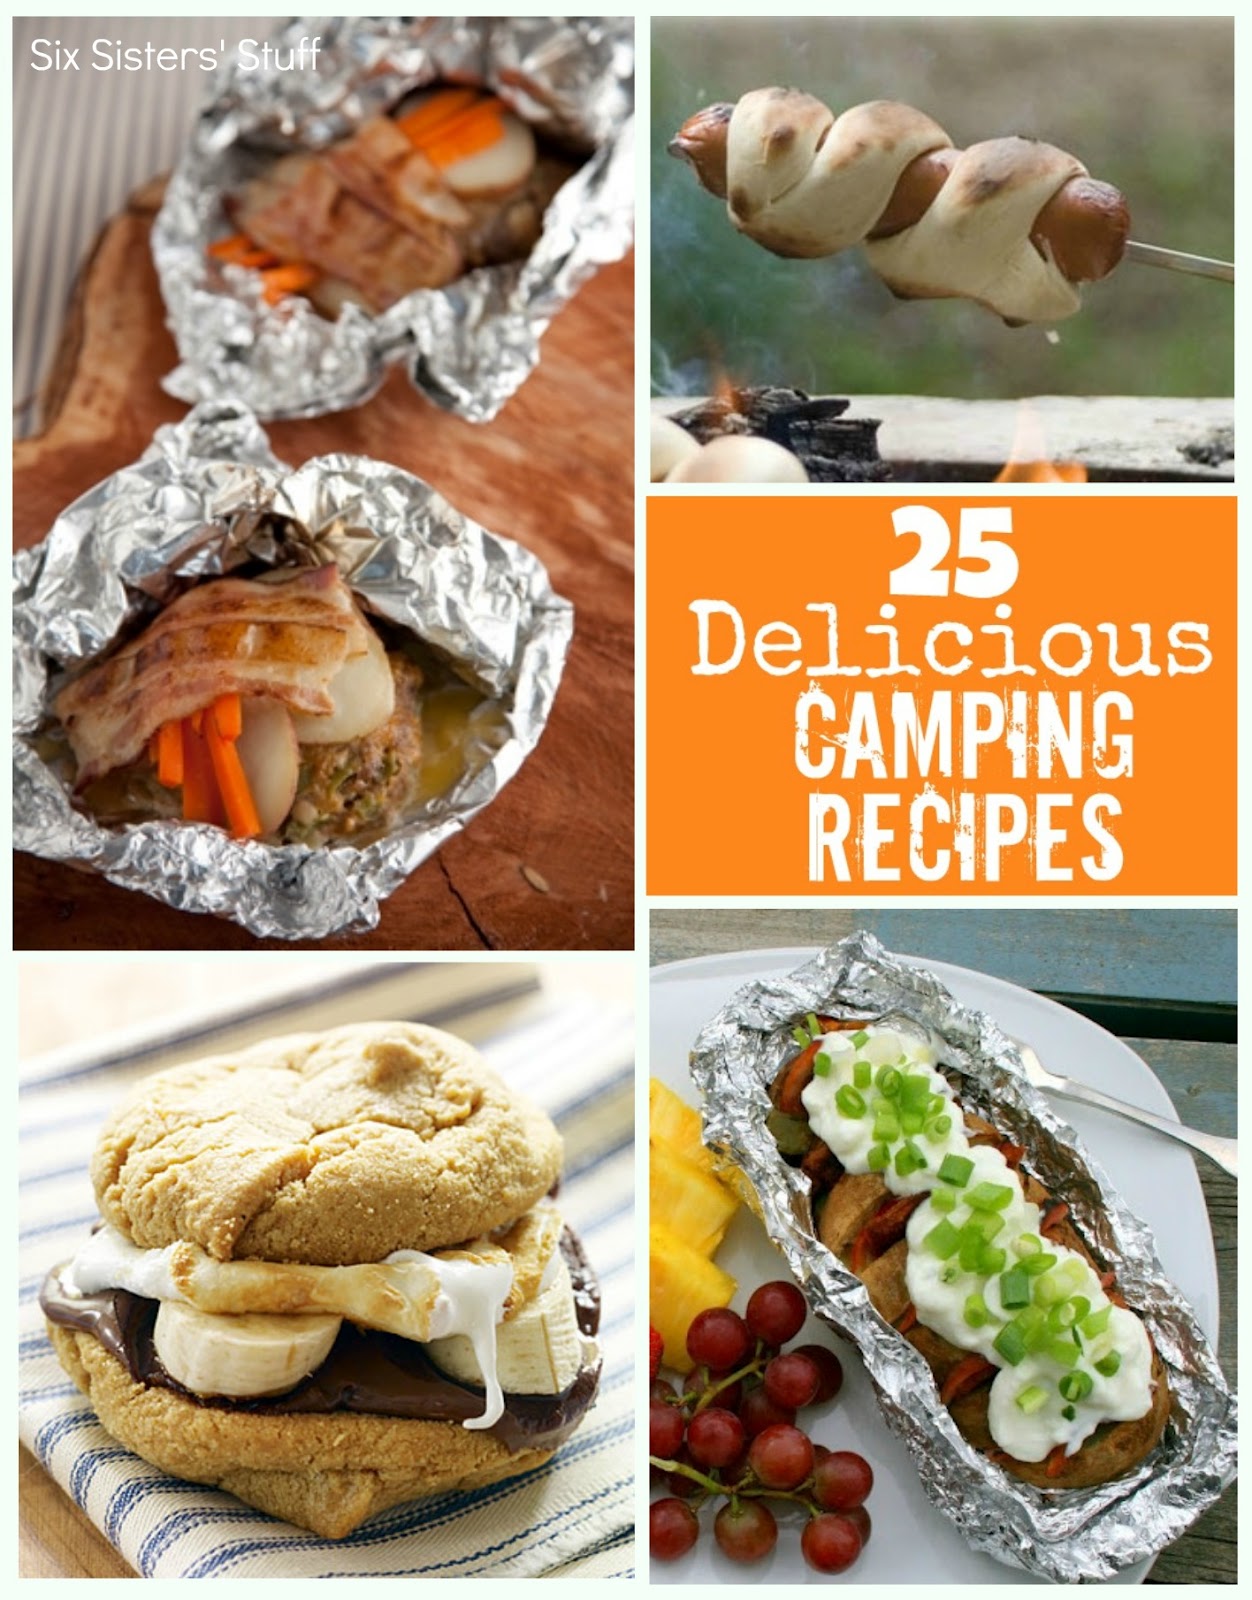 Delicious Camping Recipes From Sixbabesstuff Com From Dinner To ...